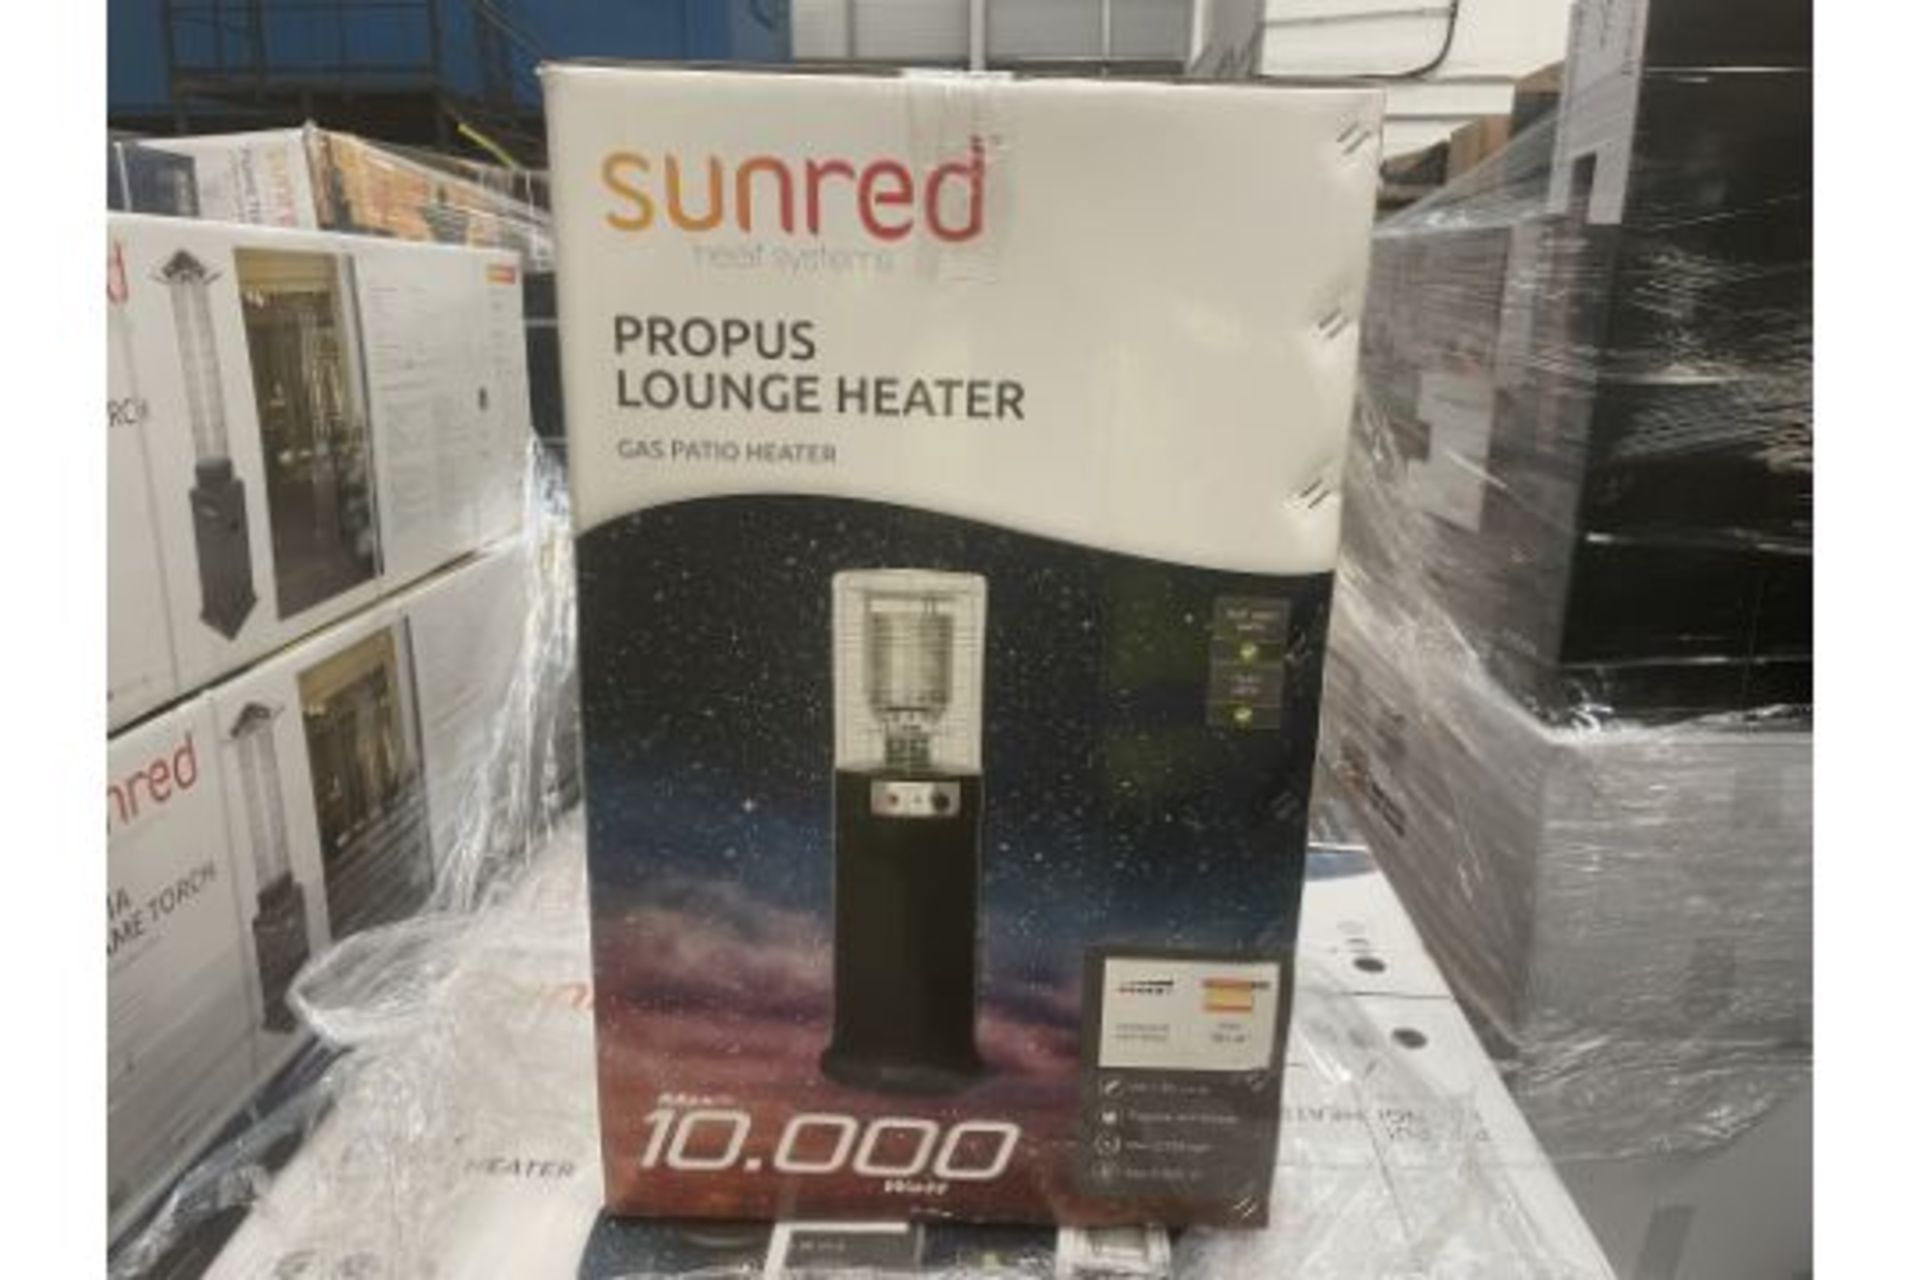 Brand new Sunred LH15G Propus Lounge Heater – Grey RRP £619 Low height unit (135cm tall) – ideal for - Image 2 of 4